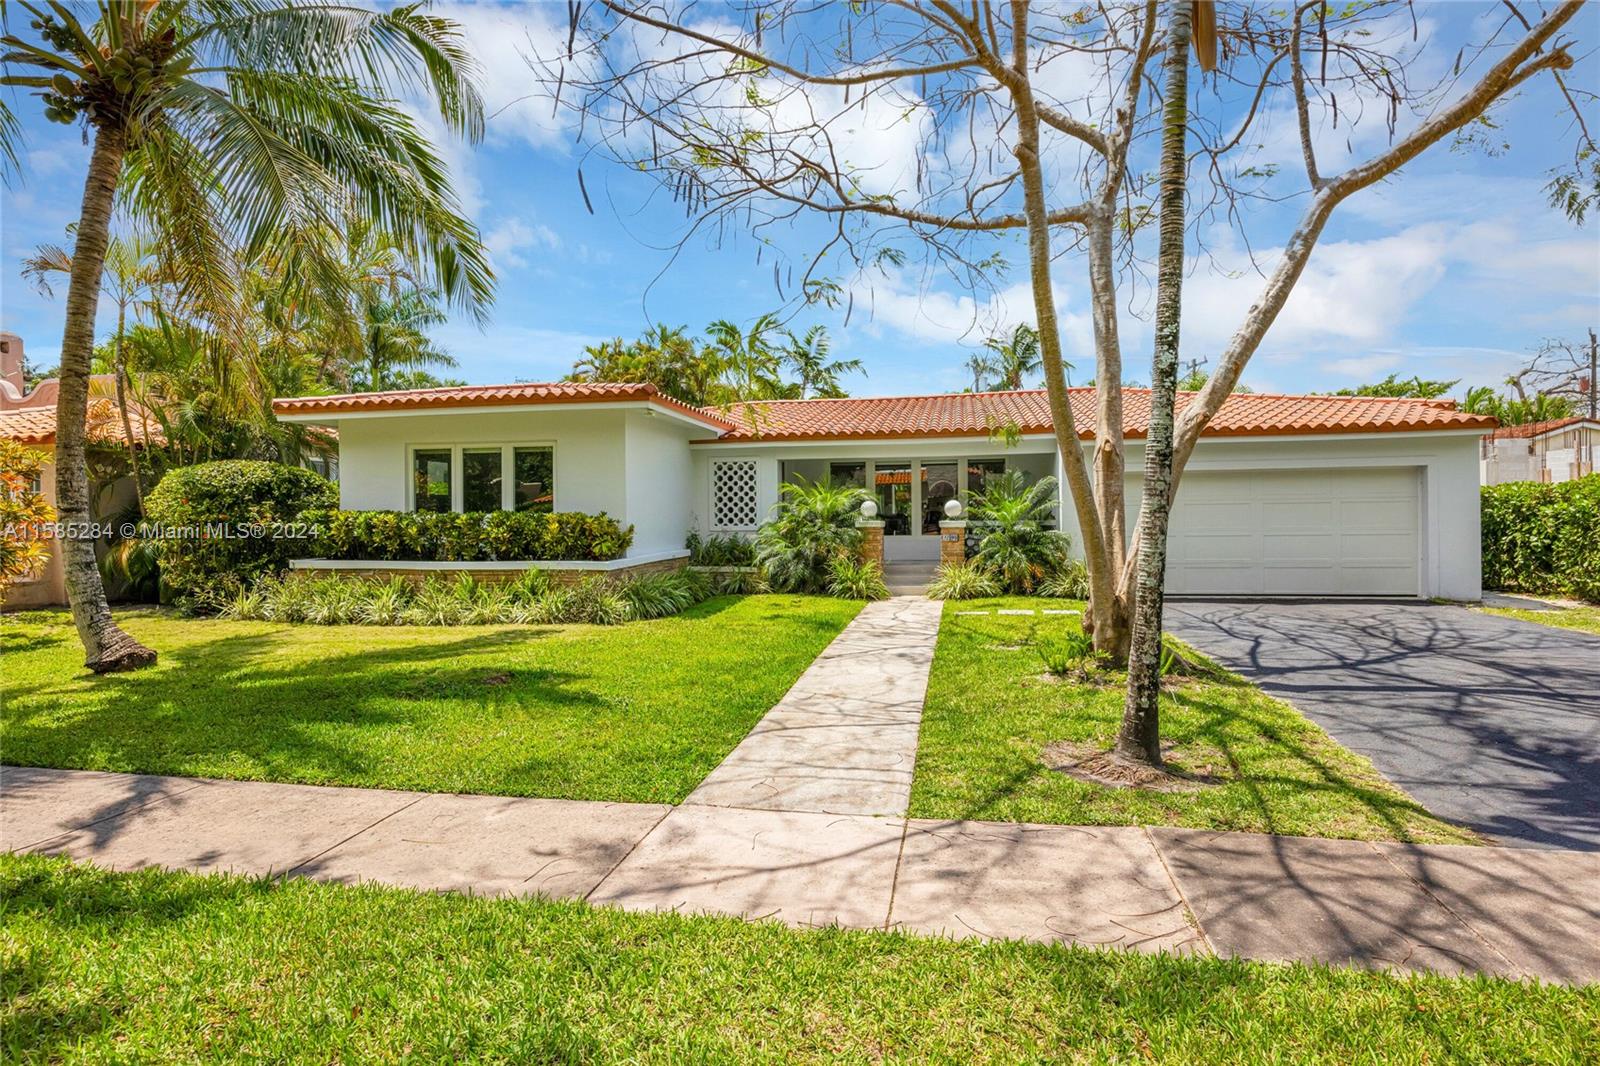 Ideally situated in the heart of Coral Gables, 2 blocks from the Granada golf course & a stone’s throw from downtown, this 4 br, 2.5 ba, 2,743 sf house on an 11,250 sf lot has been totally updated & meticulously maintained.  It features open & bright living spaces w/ light shining through new impact glass windows & drs, renovated kitchen w/ high-end appliances, custom cabinetry, & breakfast area.  The split floor plan finds the primary suite w/ new BA incl soaking tub & dual sinks to one side, w/ the remaining 3 br & redone full & half ba’s to the other.  The deep patio is accessed via French drs & steps out to the spacious lot that feels bigger than its size.  With a new roof from 2021, new a/c, full-house generator, pvc plumbing, 2 car gar and more, this house is perfectly move-in ready!